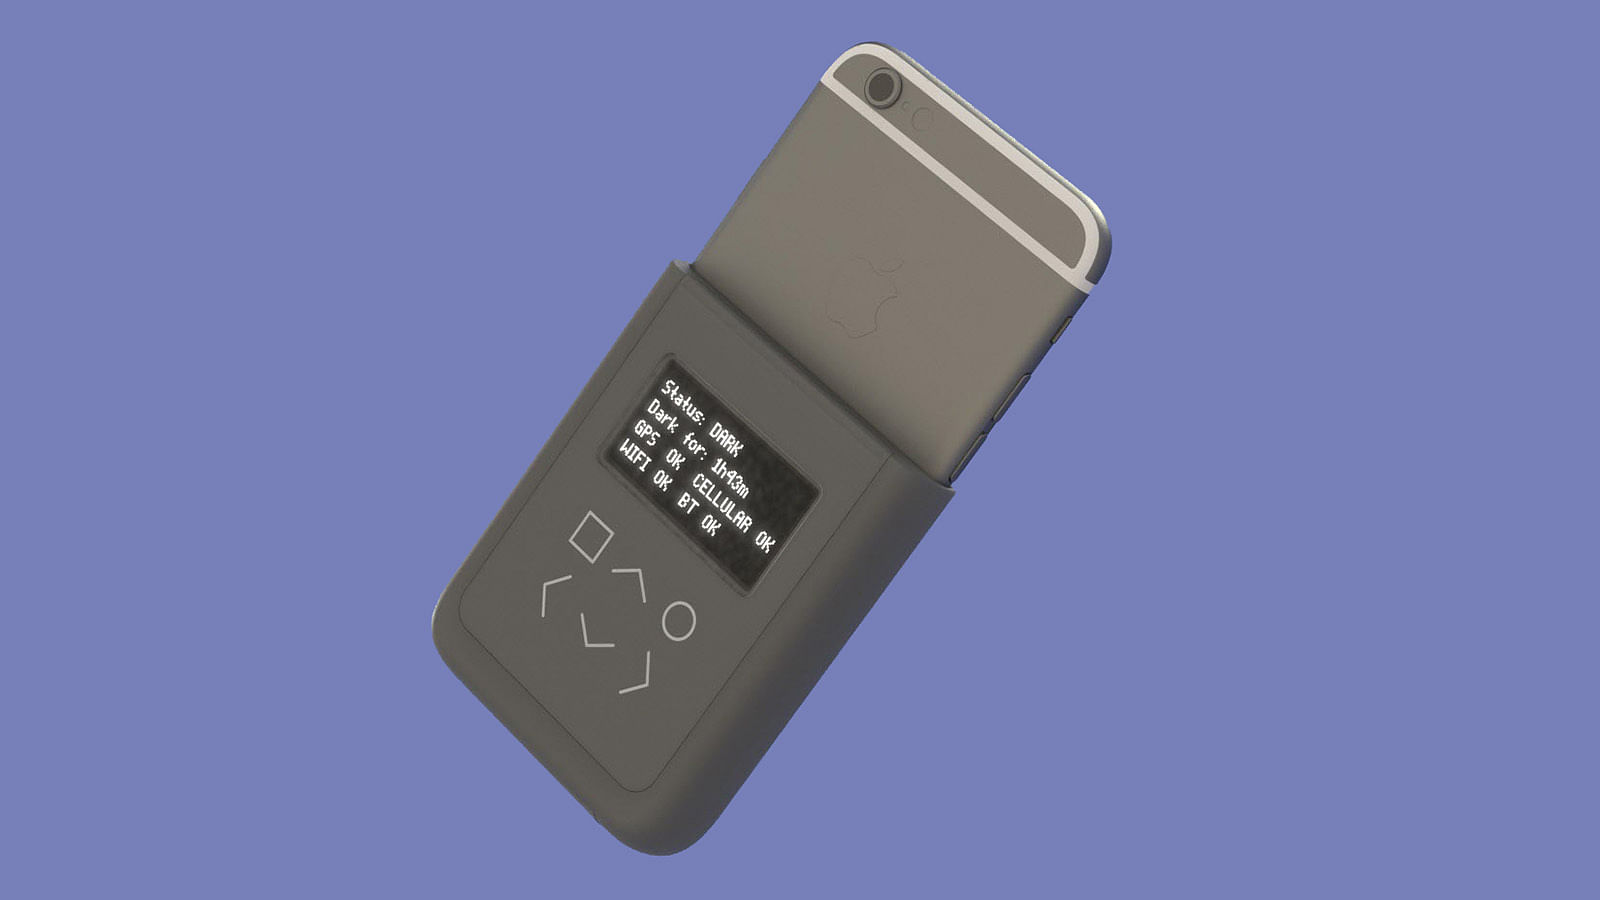 This geeky iPhone case can save you from cyber mishaps. (Photo Courtesy: <a href="https://www.pubpub.org/pub/direct-radio-introspection">Pubpub</a>)